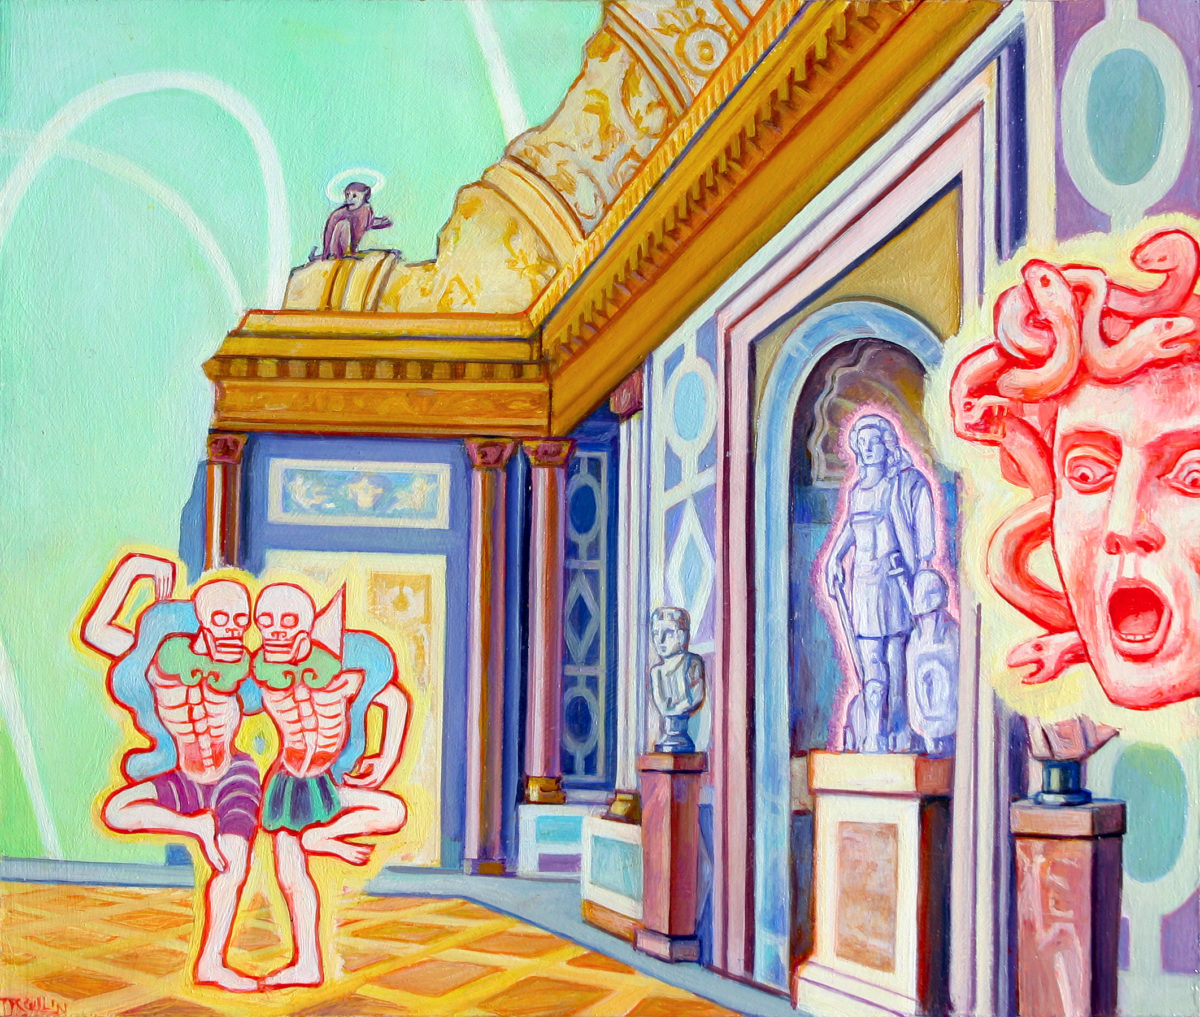 art by Tom Scullin, Versailles, Dance of Death, 2022, brightly colored allegorical images of two skeletons dancing watched by figures from mythology